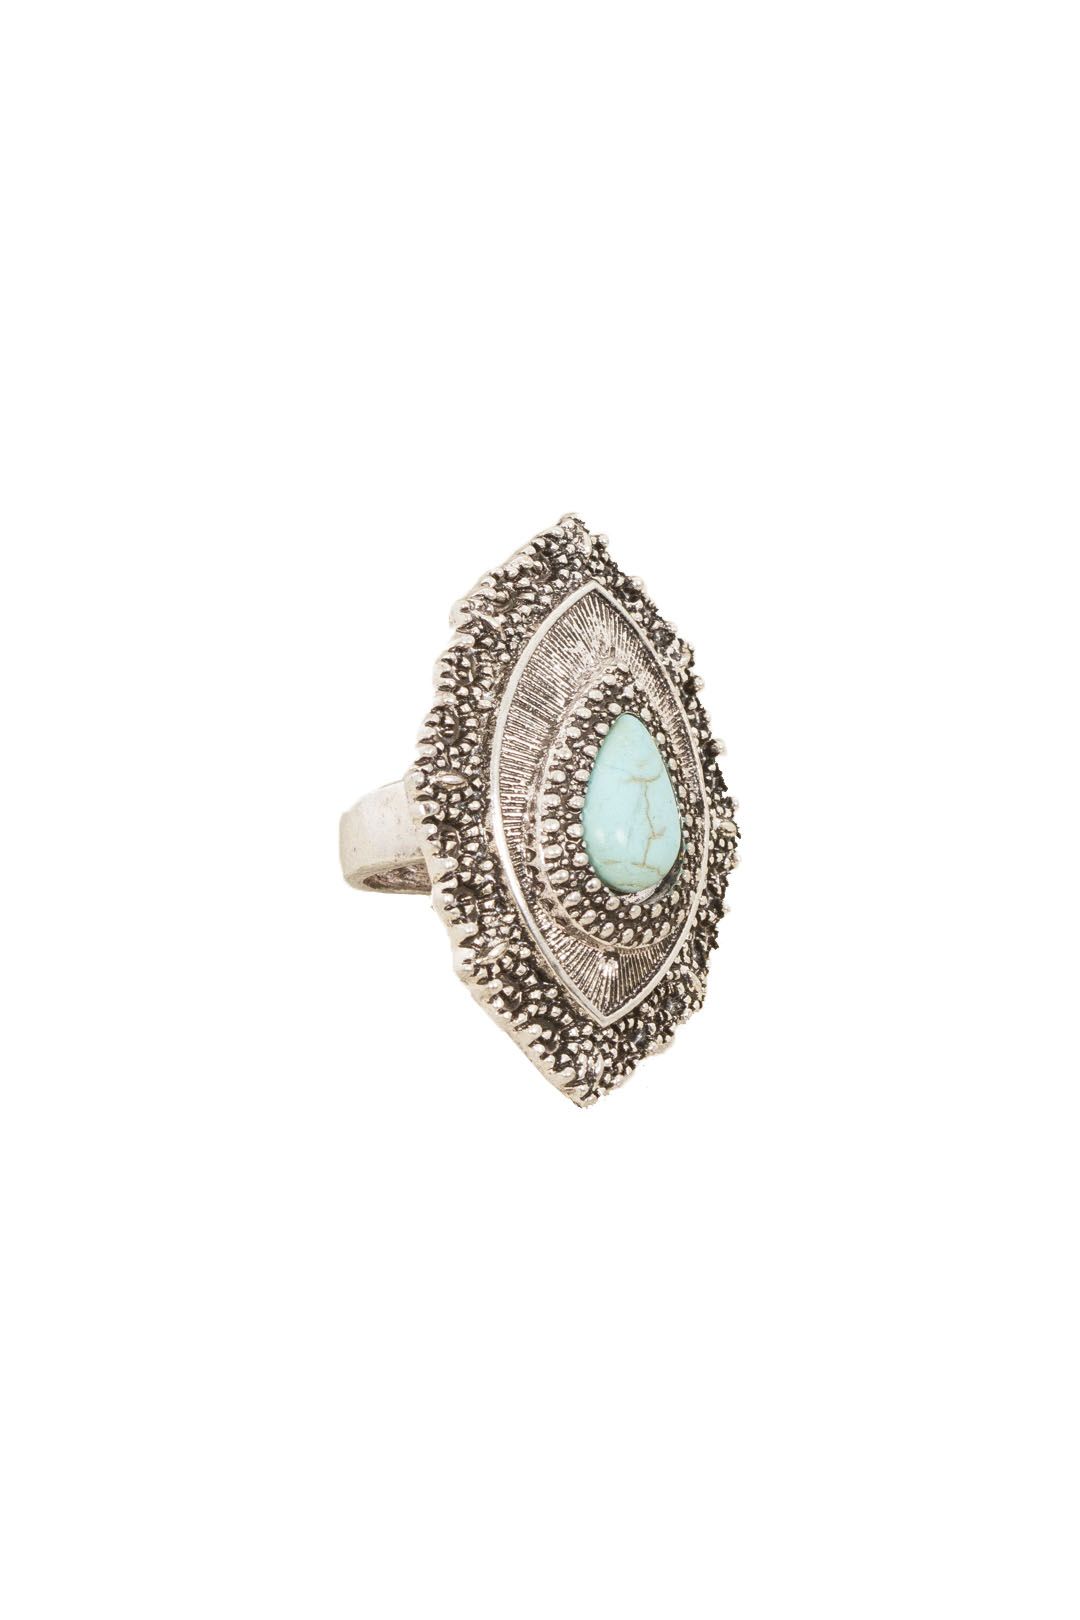 Adorne - Boho Stone Teardrop Ring - Turquoise Silver - Front